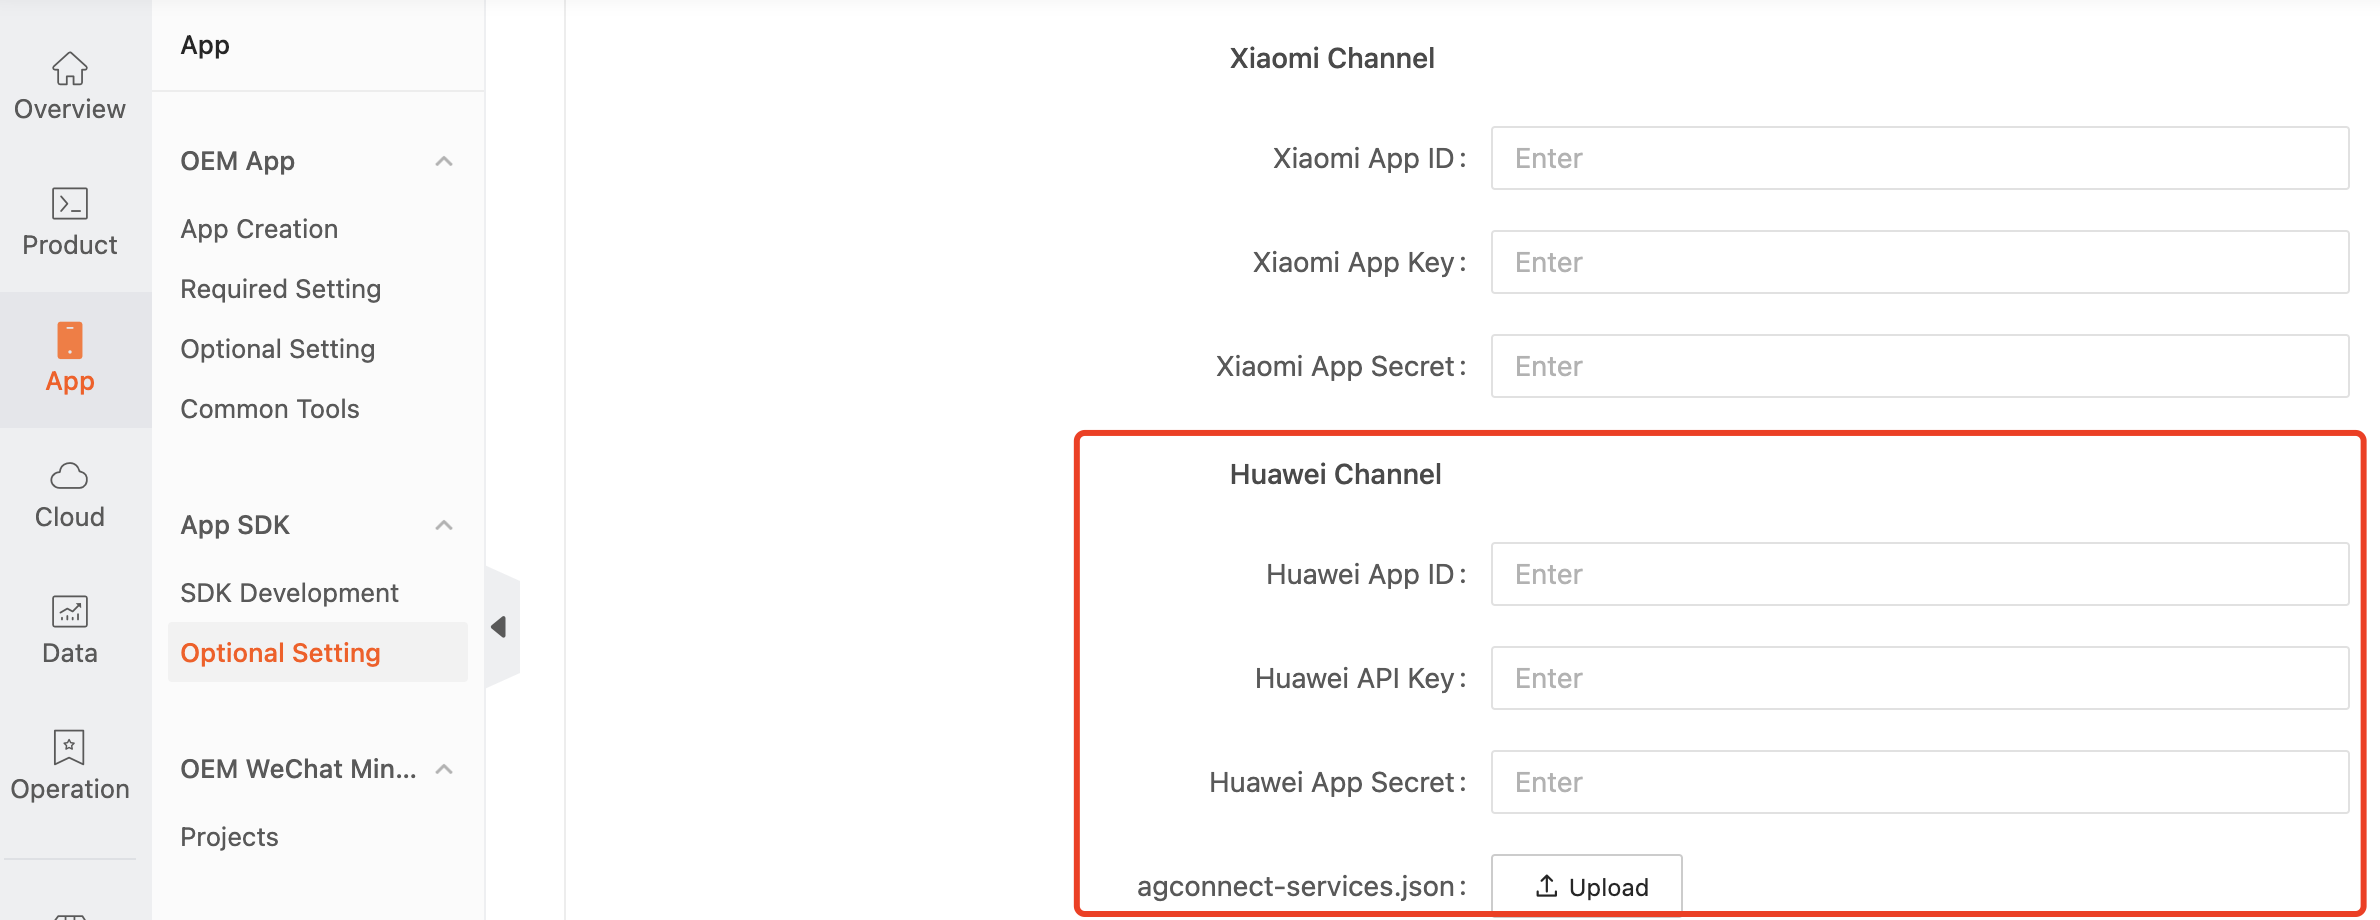 Integrate with Huawei Push Notifications